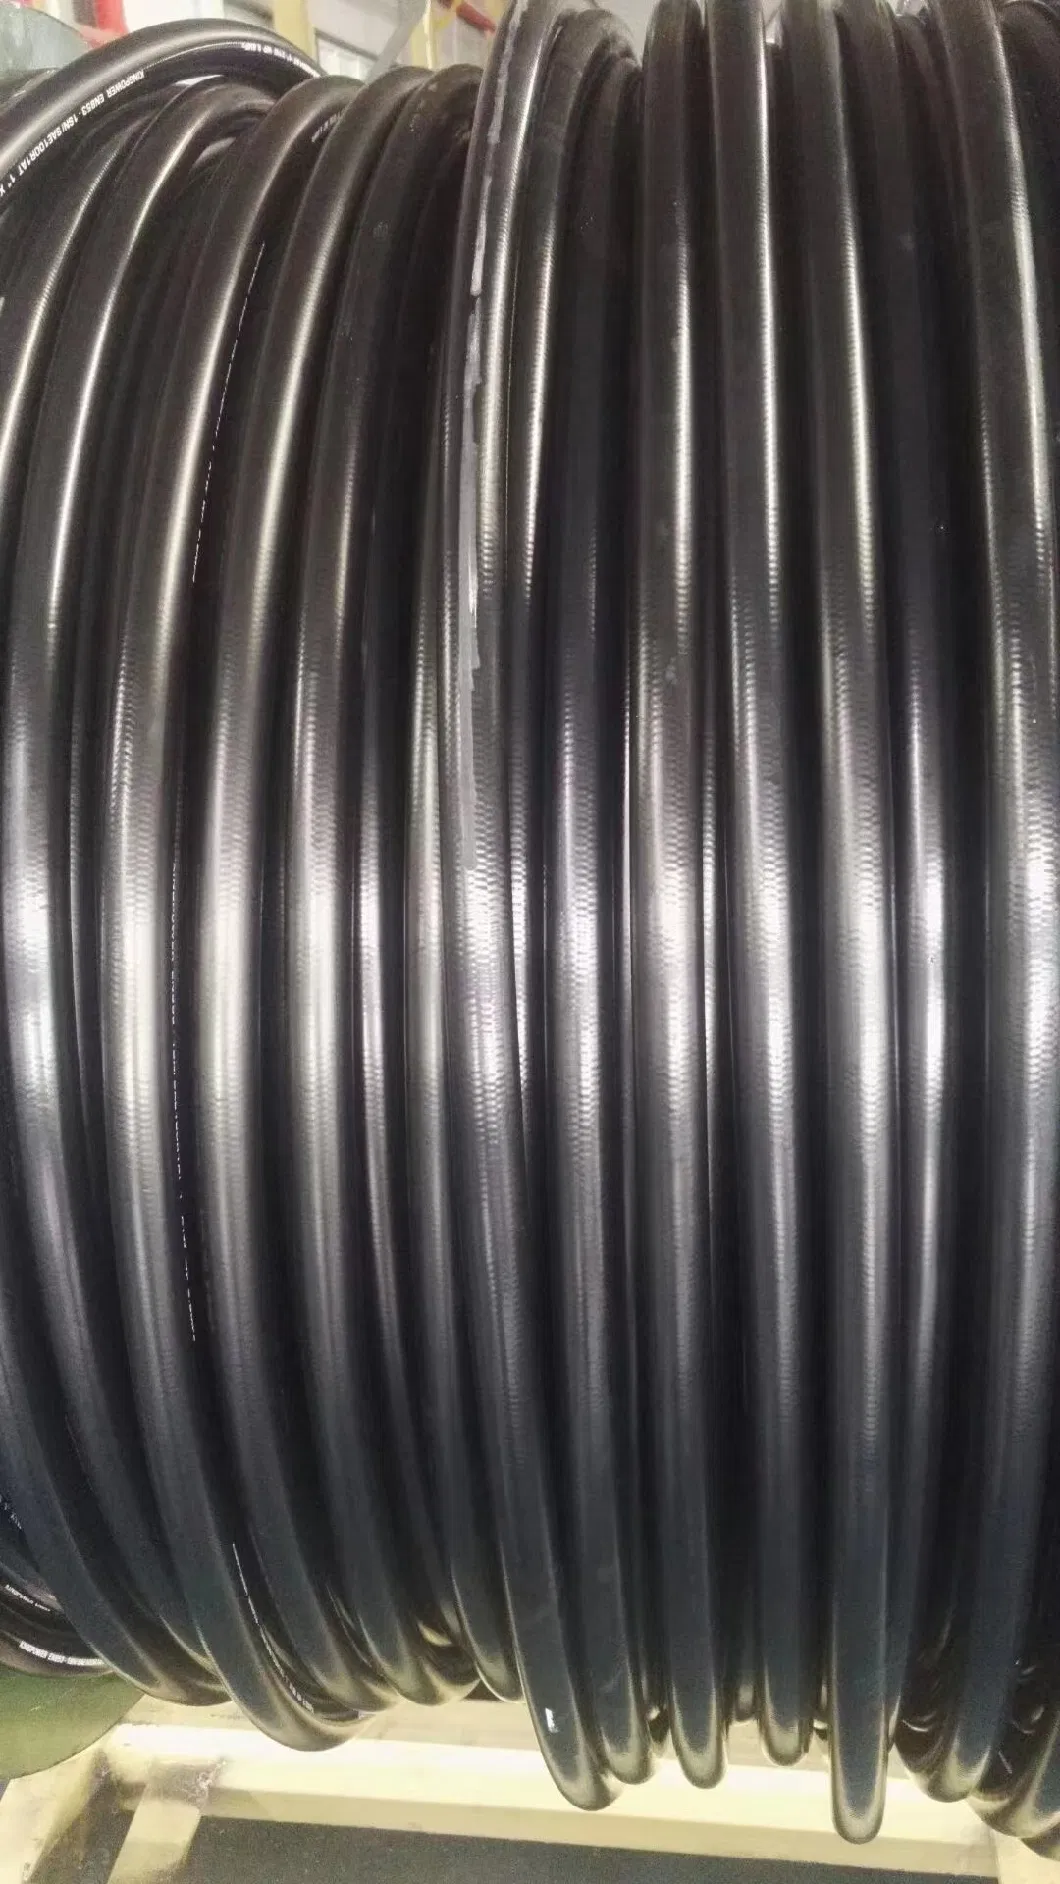 Ageing-Resistant Flexible Rubber Hose Pipe Wear-Resistant Hydraulic Hose Prices Dredge Discharge Rubber Hose